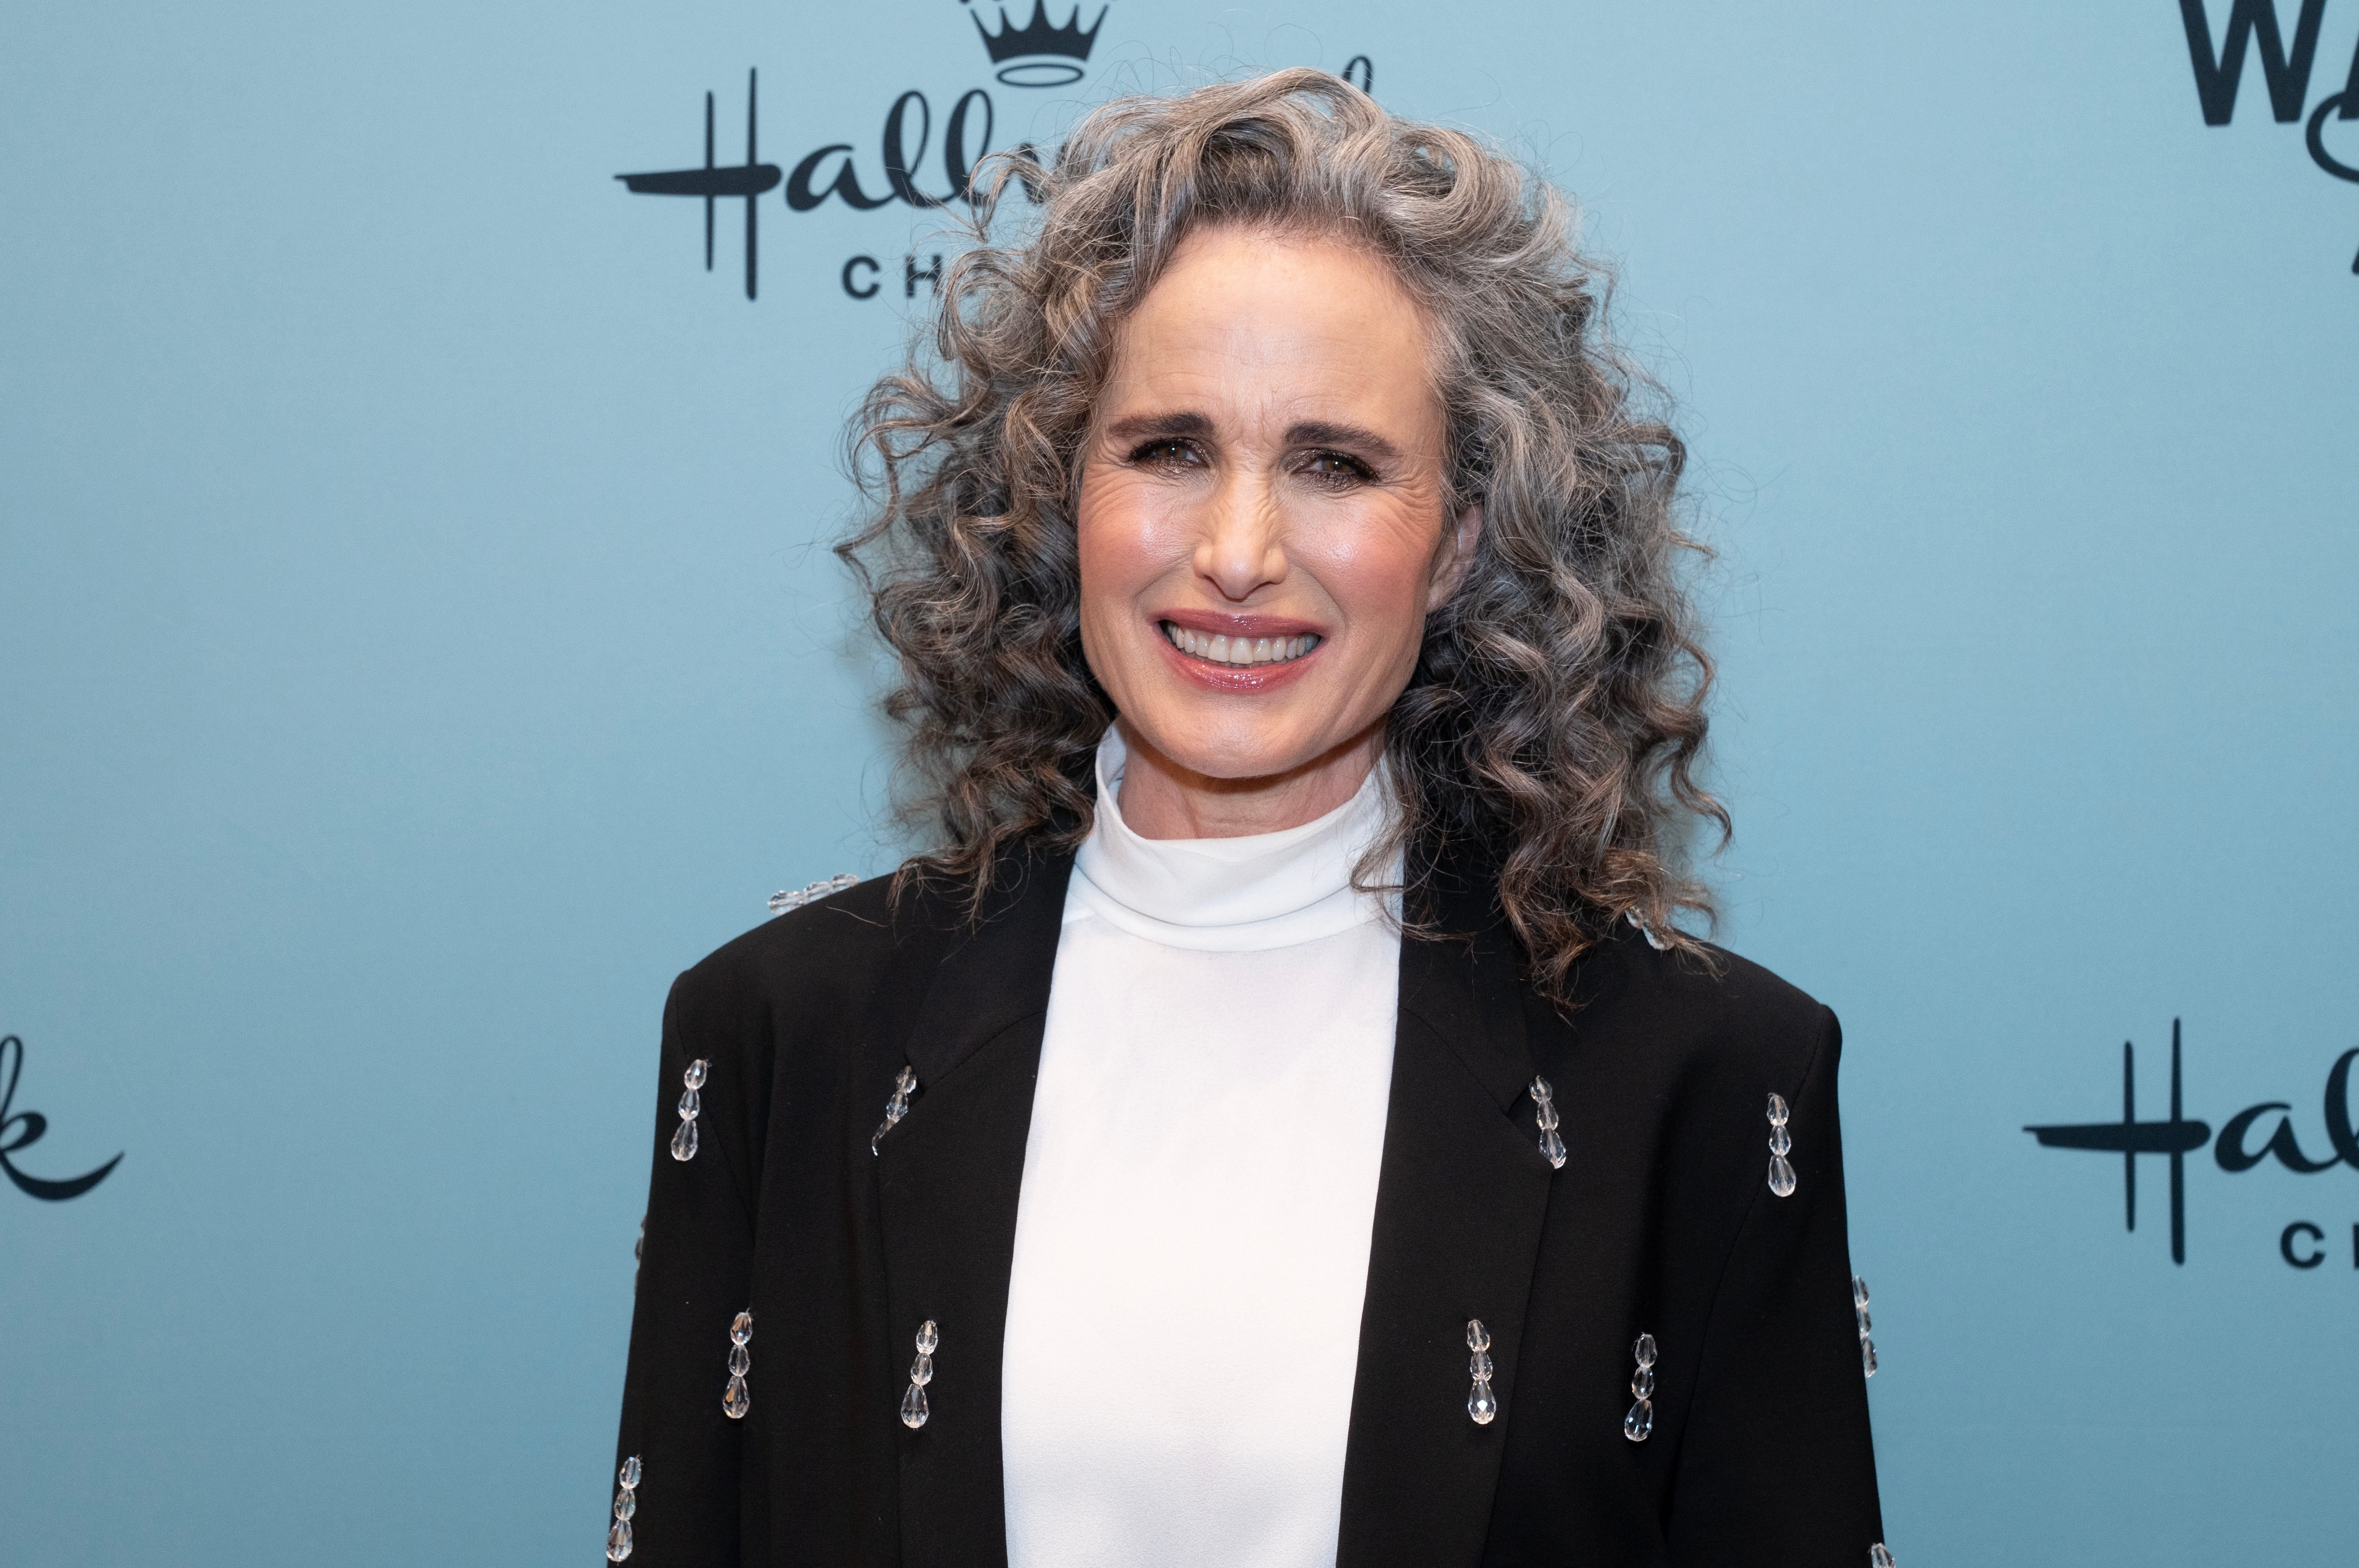 Andie MacDowell at Hallmark press event gray hair